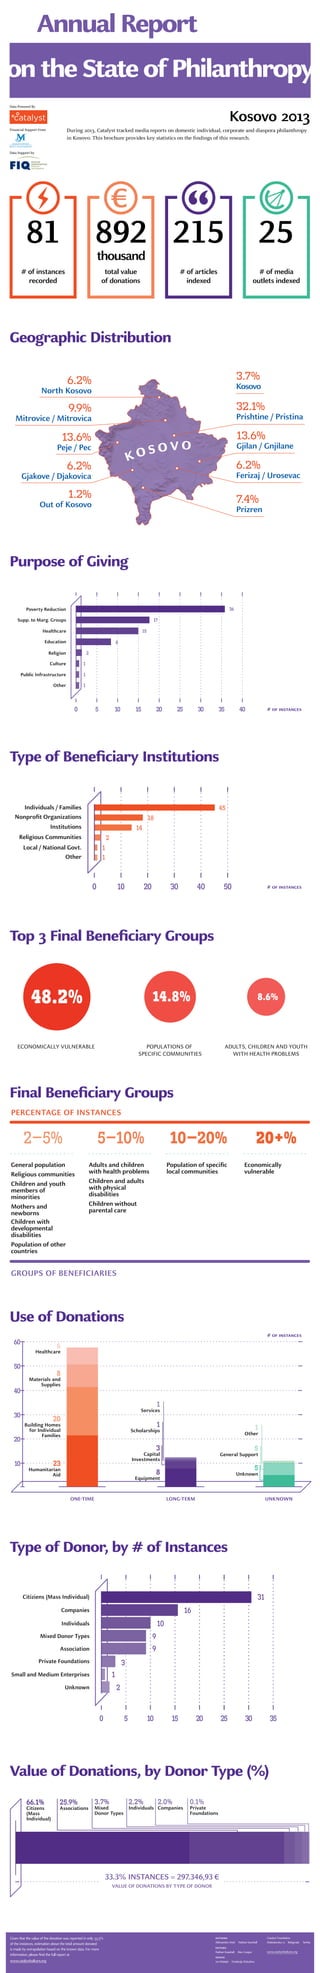 Geographic Distribution
Purpose of Giving
Type of Beneficiary Institutions
Top 3 Final Beneficiary Groups
Final Beneficiary Groups
Use of Donations
Type of Donor, by # of Instances
Value of Donations, by Donor Type (%)
Healthcare
Supp. to Marg. Groups
Poverty Reduction
Education
Culture
Religion
Public Infrastructure
Other
0 5 10 15 20 25 30 35 40
36
17
15
8
2
1
1
1
Institutions
Individuals / Families
Nonprofit Organizations
Local / National Govt.
Other
Religious Communities
0 10 20 30 40 50
45
18
14
2
1
1
2–5% 5–10% 10–20% 20+%
General population
Religious communities
Children and youth
members of
minorities
Mothers and
newborns
Children with
developmental
disabilities
Population of other
countries
Adults and children
with health problems
Children and adults
with physical
disabilities
Children without
parental care
Economically
vulnerable
PERCENTAGE OF INSTANCES
GROUPS OF BENEFICIARIES
Population of specific
local communities
1
Services
1
Scholarships
3
Capital
Investments
8
Equipment
5
General Support
5
Unknown
20
Building Homes
for Individual
Families
30
40
50
60
ONE-TIME LONG-TERM UNKNOWN
6
Healthcare
8
Materials and
Supplies
20
10 23
Humanitarian
Aid
1
Other
Companies
Mixed Donor Types
Citiziens (Mass Individual)
Association
Individuals
Small and Medium Enterprises
Private Foundations
Unknown
0 5 10 15 20 25
31
16
10
9
9
3
2
1
30 35
66.1%
Citizens
(Mass
Individual)
25.9%
Associations
3.7%
Mixed
Donor Types
2.2%
Individuals
2.0%
Companies
0.1%
Private
Foundations
33.3% INSTANCES = 297.346,93 €
VALUE OF DONATIONS BY TYPE OF DONOR
215 25892
thousand
81
# of instances
recorded
# of articles
indexed
# of media
outlets indexed
total value
of donations
Annual Report
on the State of Philanthropy
215 25892thousand
81
# of instances
recorded
# of articles
indexed
# of media
outlets indexed
total value
of donations
48.2% 14.8% 8.6%
ECONOMICALLY VULNERABLE POPULATIONS OF
SPECIFIC COMMUNITIES
ADULTS, CHILDREN AND YOUTH
WITH HEALTH PROBLEMS
K O S O V O
6.2%
Gjakove / Djakovica
6.2%
North Kosovo
32.1%
Prishtine / Pristina
3.7%
Kosovo
7.4%
Prizren
6.2%
Ferizaj / Urosevac
9.9%
Mitrovice / Mitrovica
1.2%
Out of Kosovo
13.6%
Peje / Pec
13.6%
Gjilan / Gnjilane
Kosovo 2013
# of instances
# of instances
# of instances
During 2013, Catalyst tracked media reports on domestic individual, corporate and diaspora philanthropy
in Kosovo. This brochure provides key statistics on the findings of this research.
Data Powered By
Financial Support From
Catalyst Foundation
Makedonska 21  Belegrade Serbia
www.catalystbalkans.org
authors
Aleksandra Vesić  Nathan Koeshall
editors
Nathan Koeshall  Alex Cooper
design
Ivo Matejin  Fondacija Dokukino
Given that the value of the donation was reported in only 33.3%
of the instances, estimation about the total amount donated
is made by extrapolation based on the known data. For more
information, please find the full report at
www.catalystbalkans.org
Data Support by
 